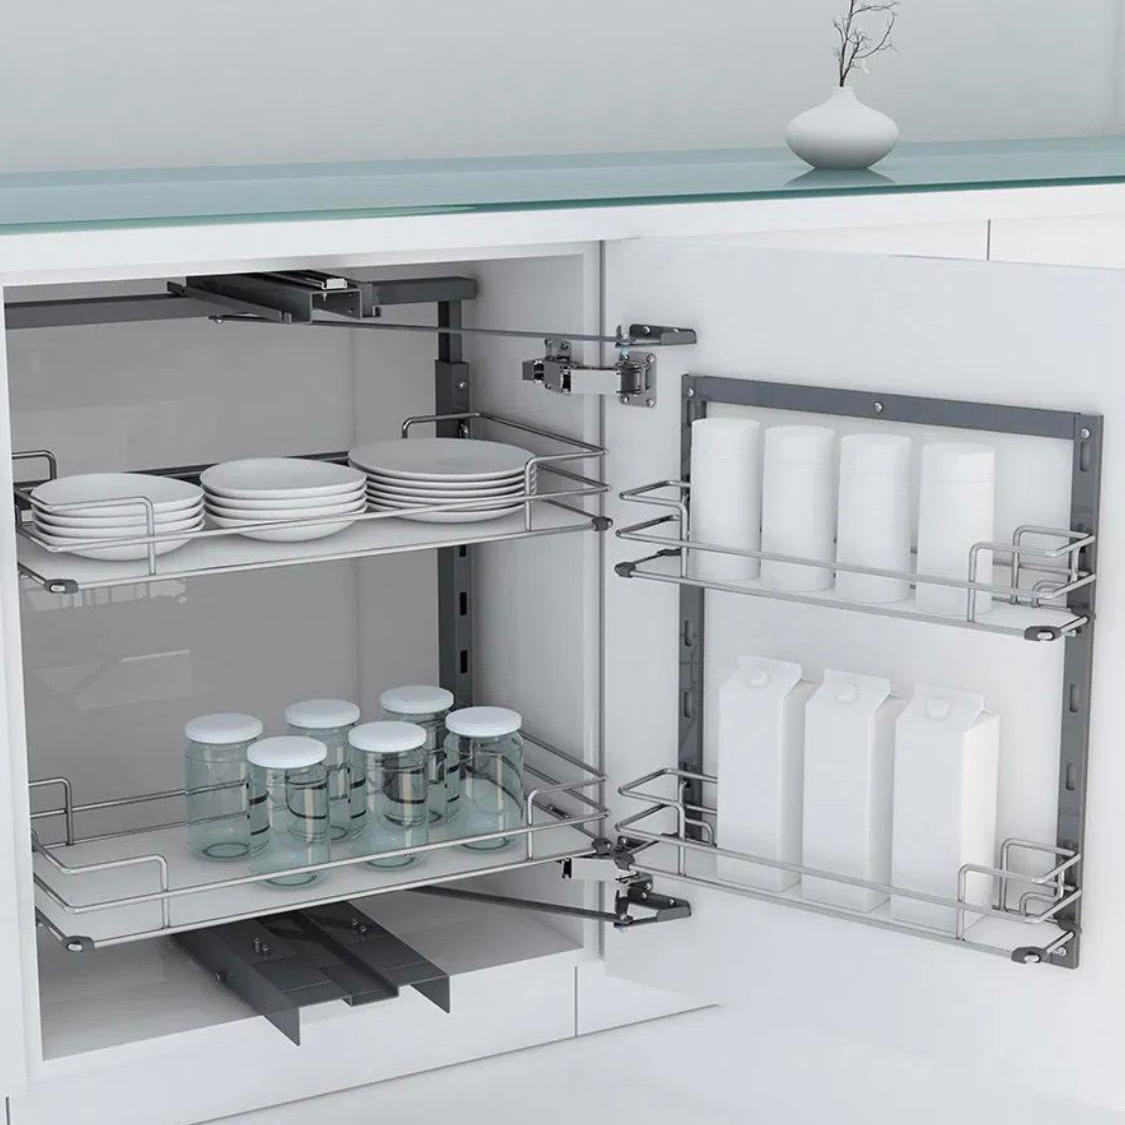 Buy Tandem Pull Out Pantry Storage Online | Manufacturing Production Services | Qetaat.com